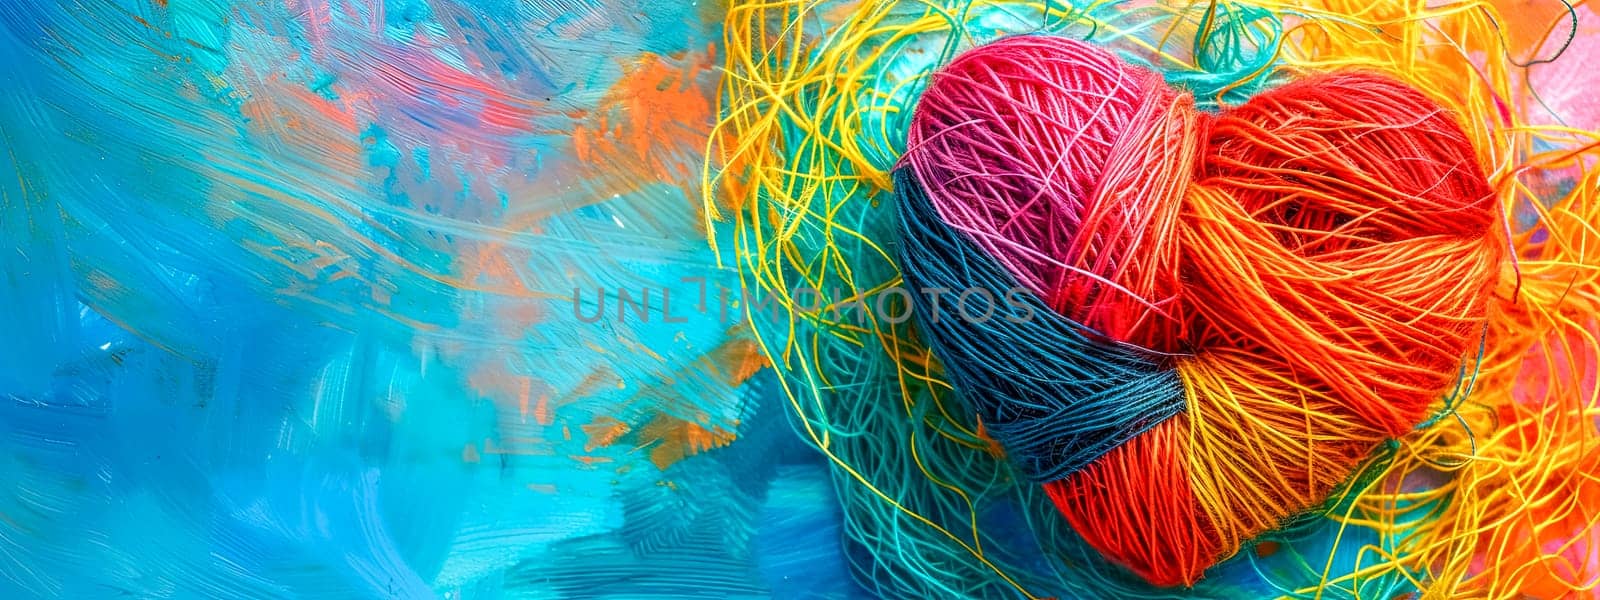 Yarn heart on vibrant background with artistic design.